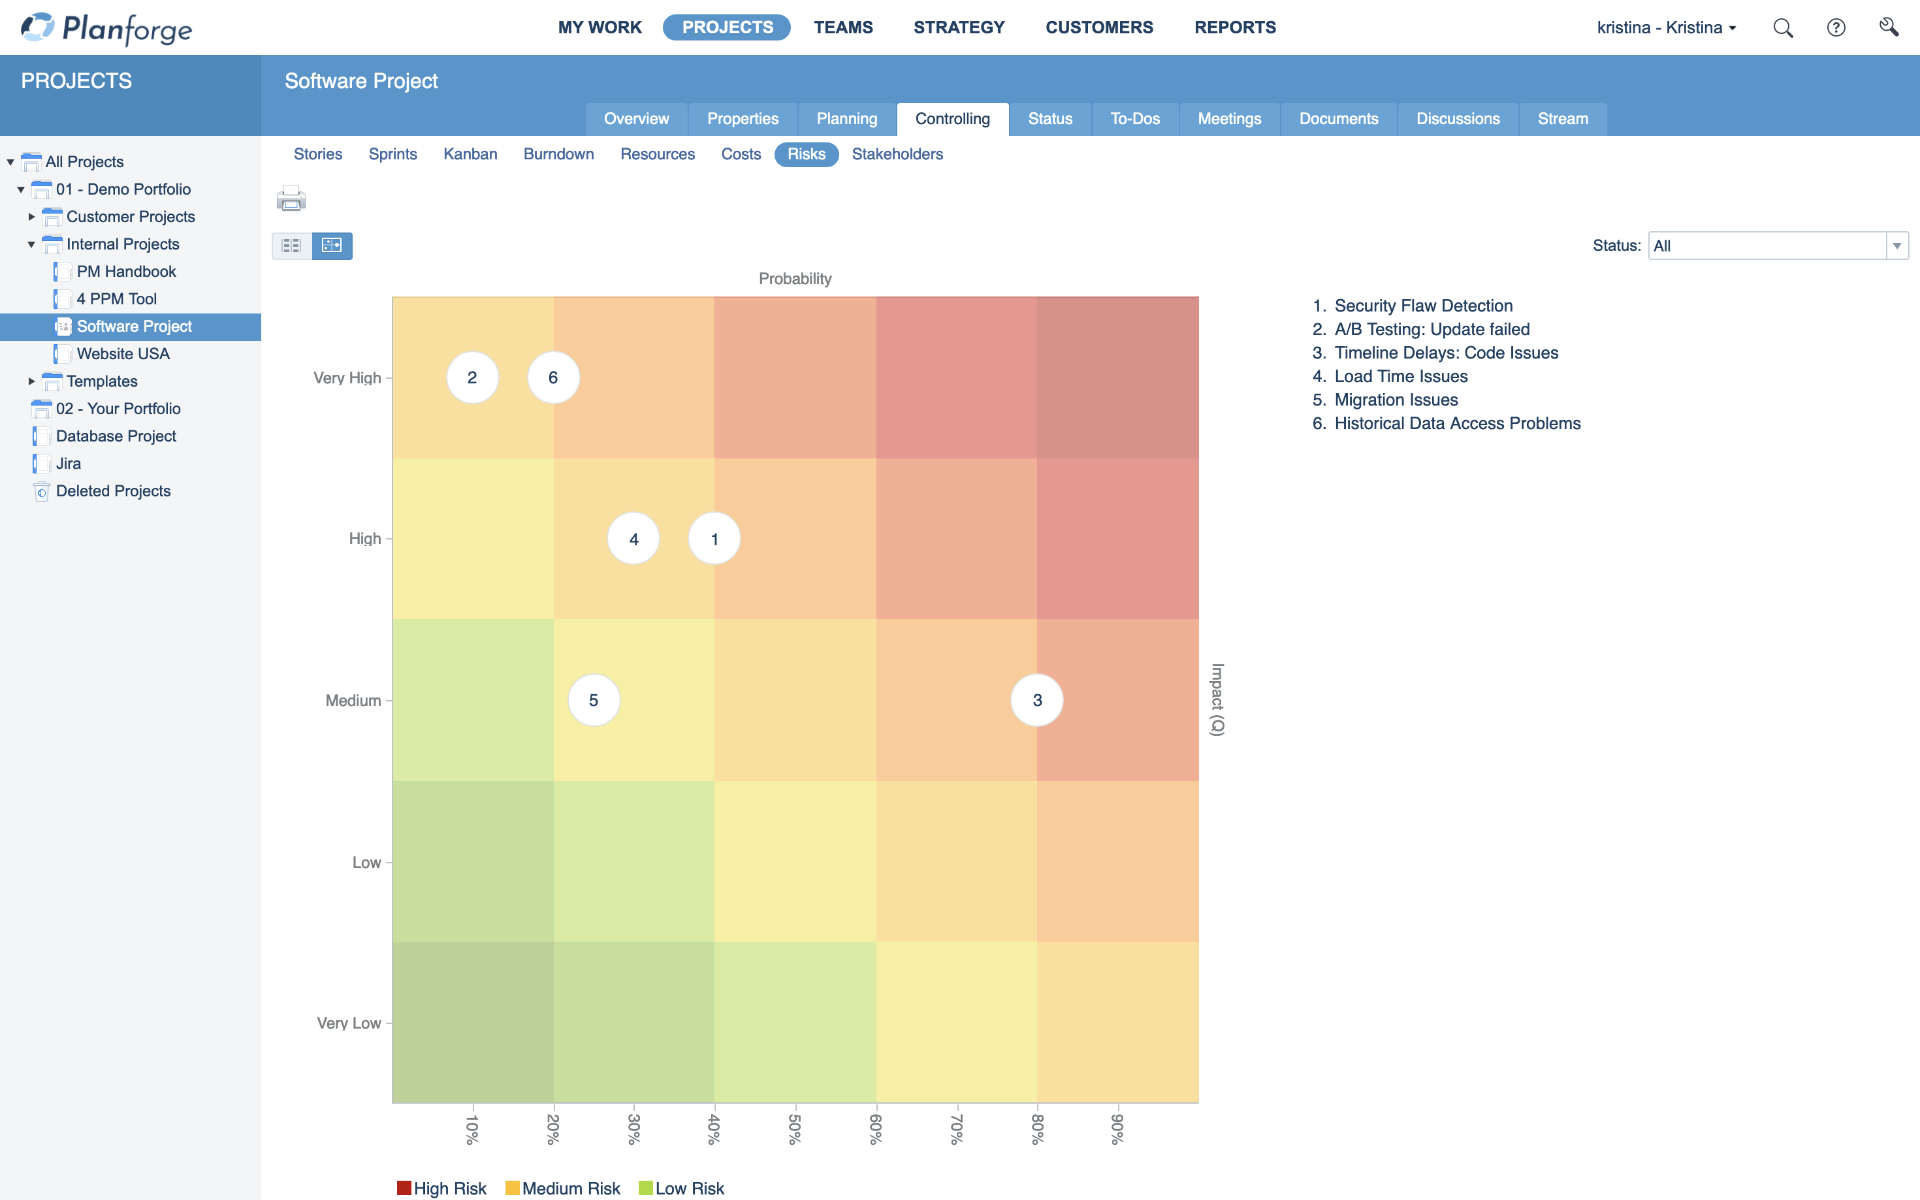 Planforge Software - Risk management: An automatic generated risk matrix to help spot problems early and react faster